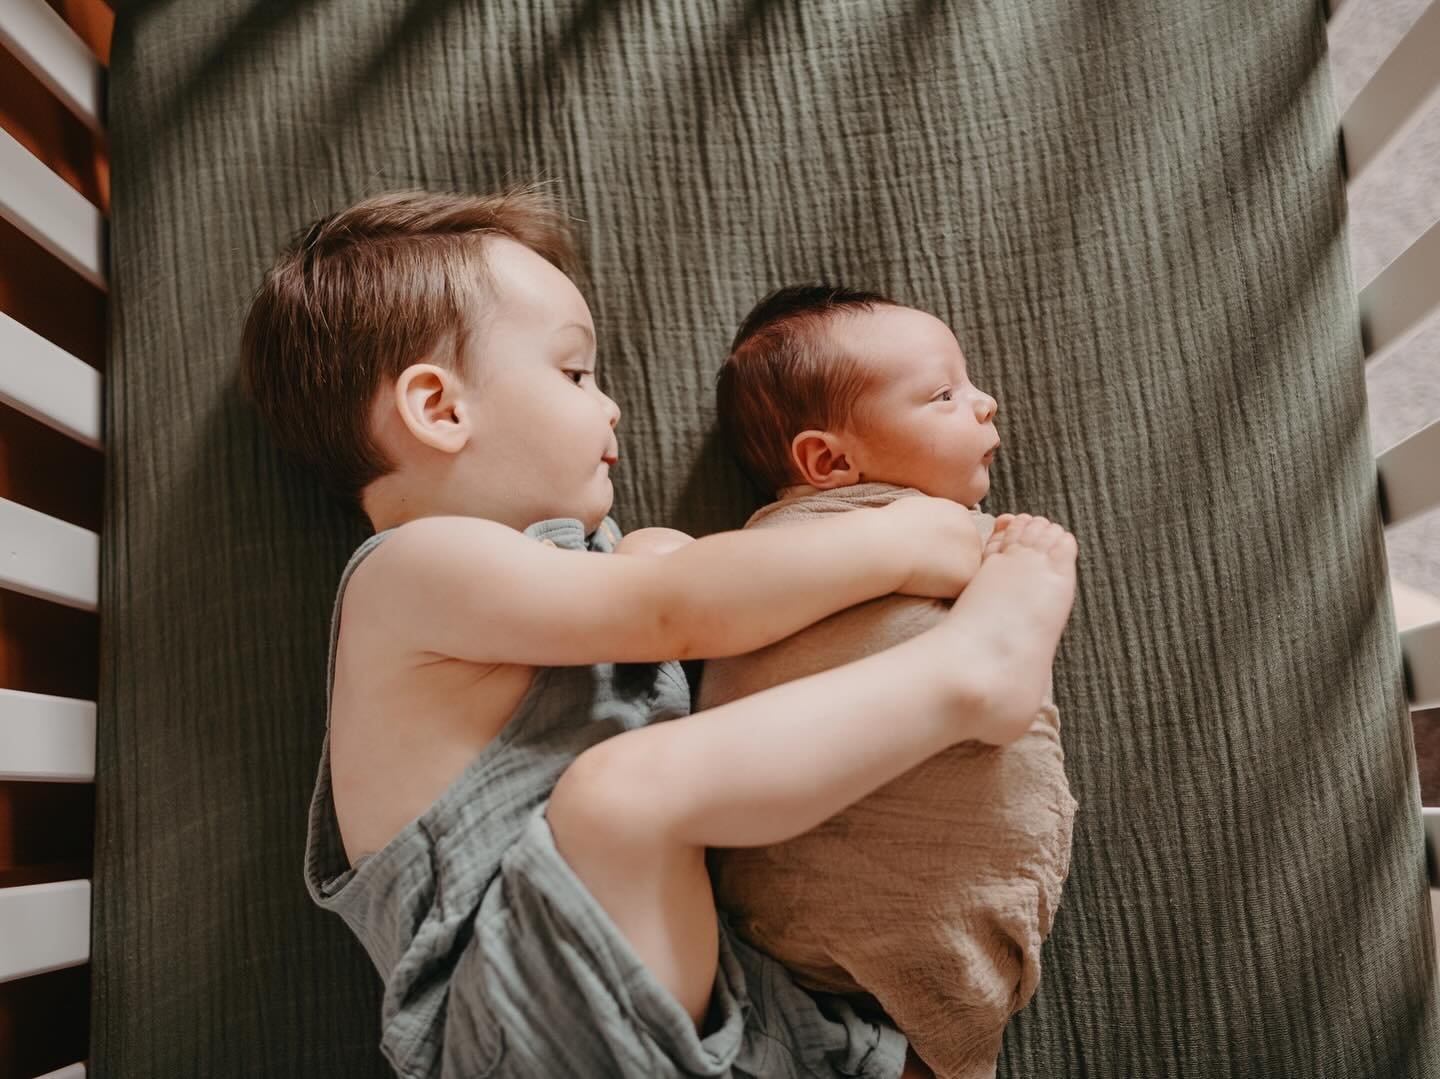 Two little boys. A built in best friend. Brothers forever. 
⁺₊⋆ ☾⋆⁺₊⋆
.⁣
.⁣
.⁣
#delaneydobsonphotography #philadelphiaphotographer #njphotographer #njphotography #newjerseyphotographer #newjerseyphotography #horshamphotographer #horsham #newborn #new